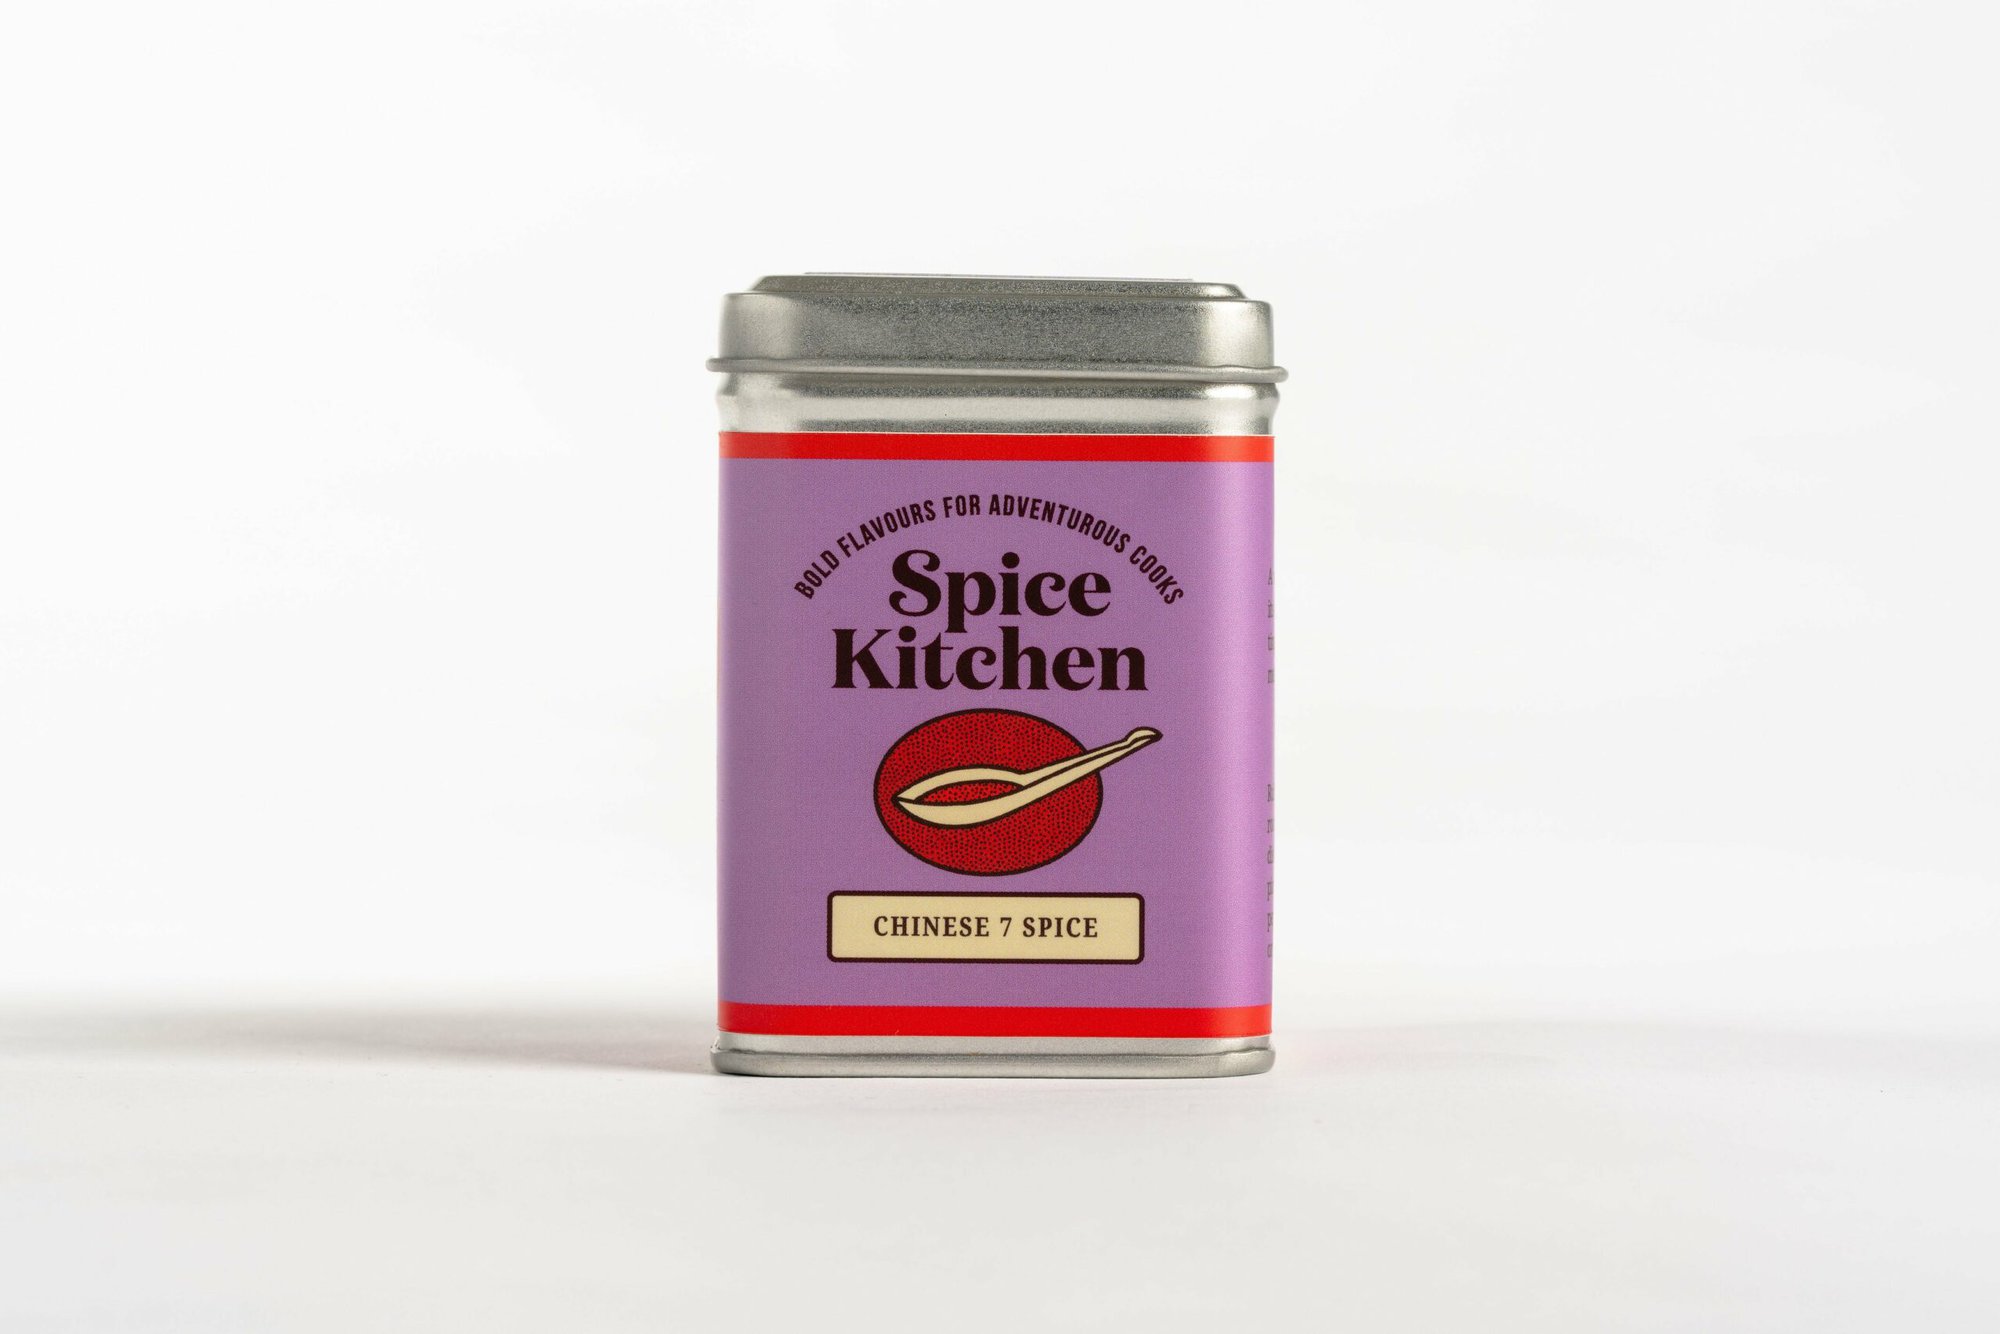 Spice Blends Tin - Chinese 7 Spice (80g)